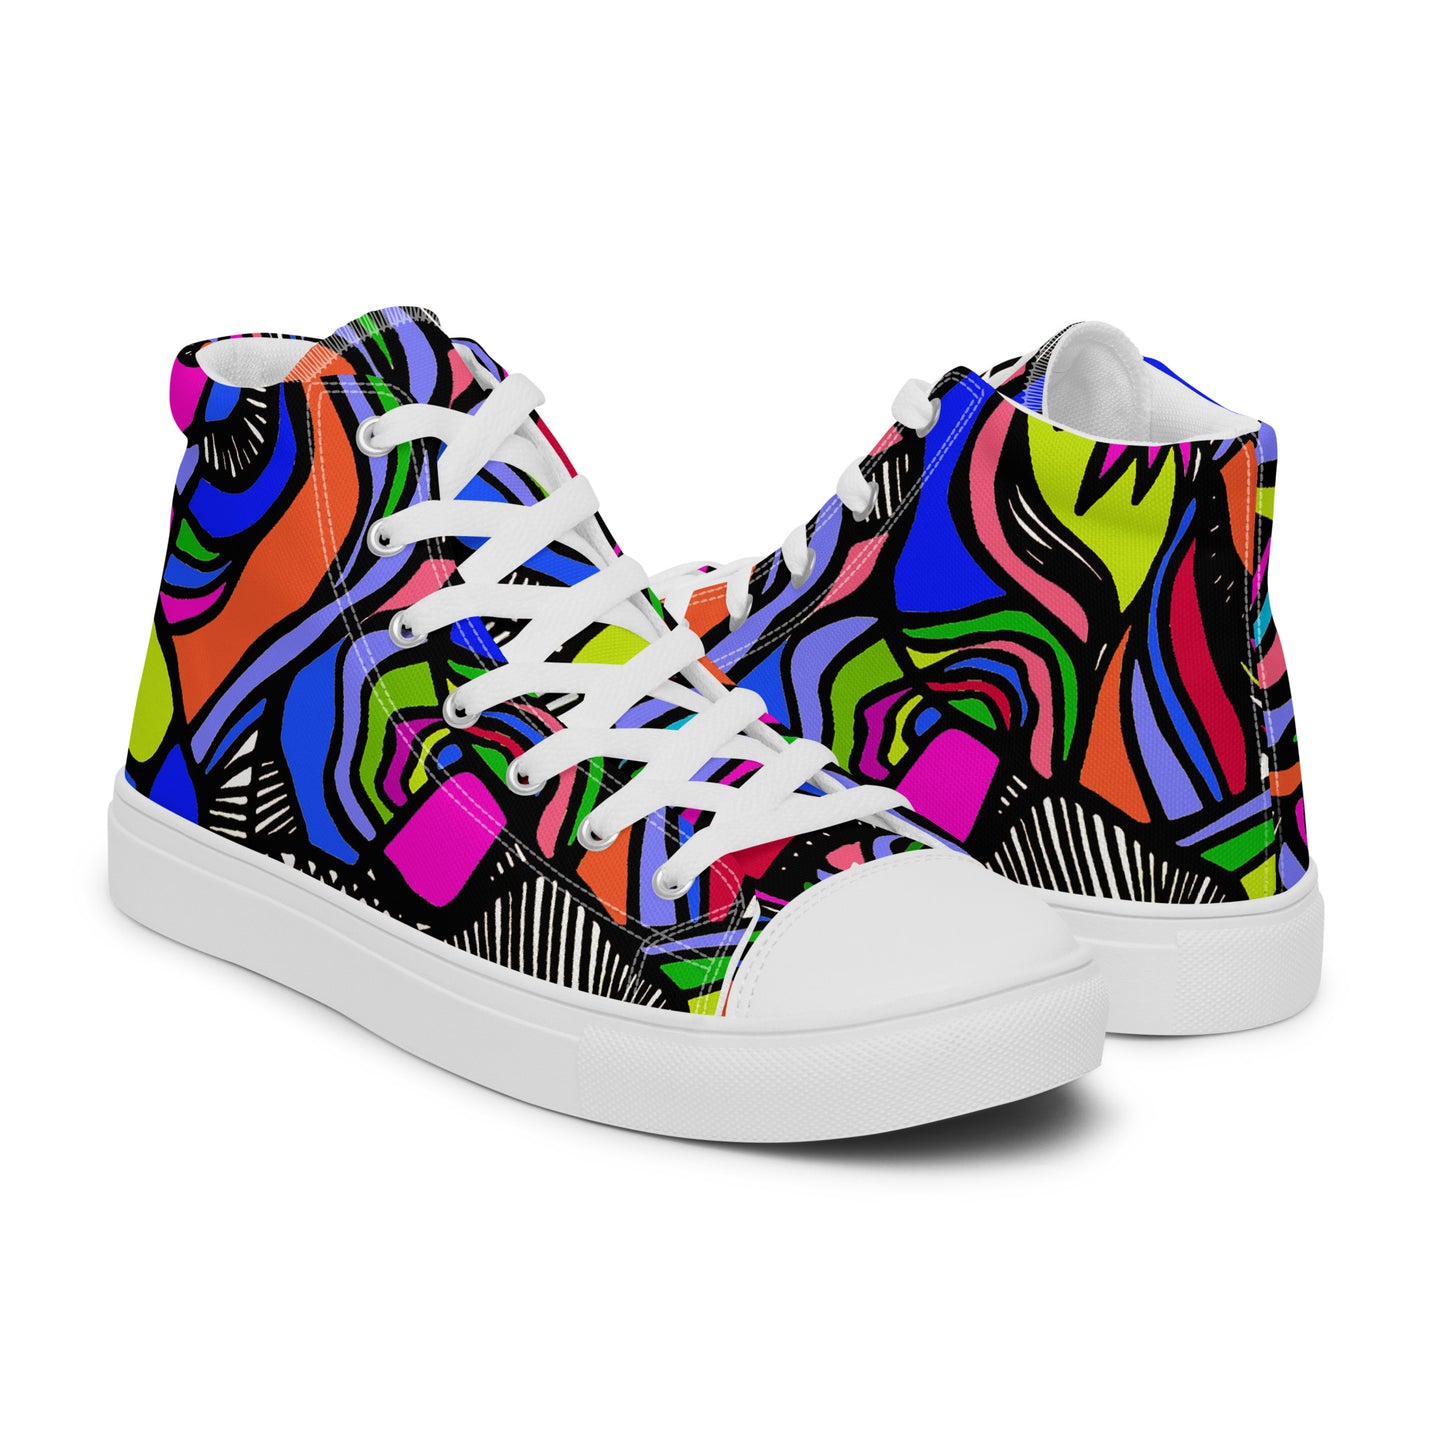 It's a Colorful Whirled High Top Canvas Sneakers